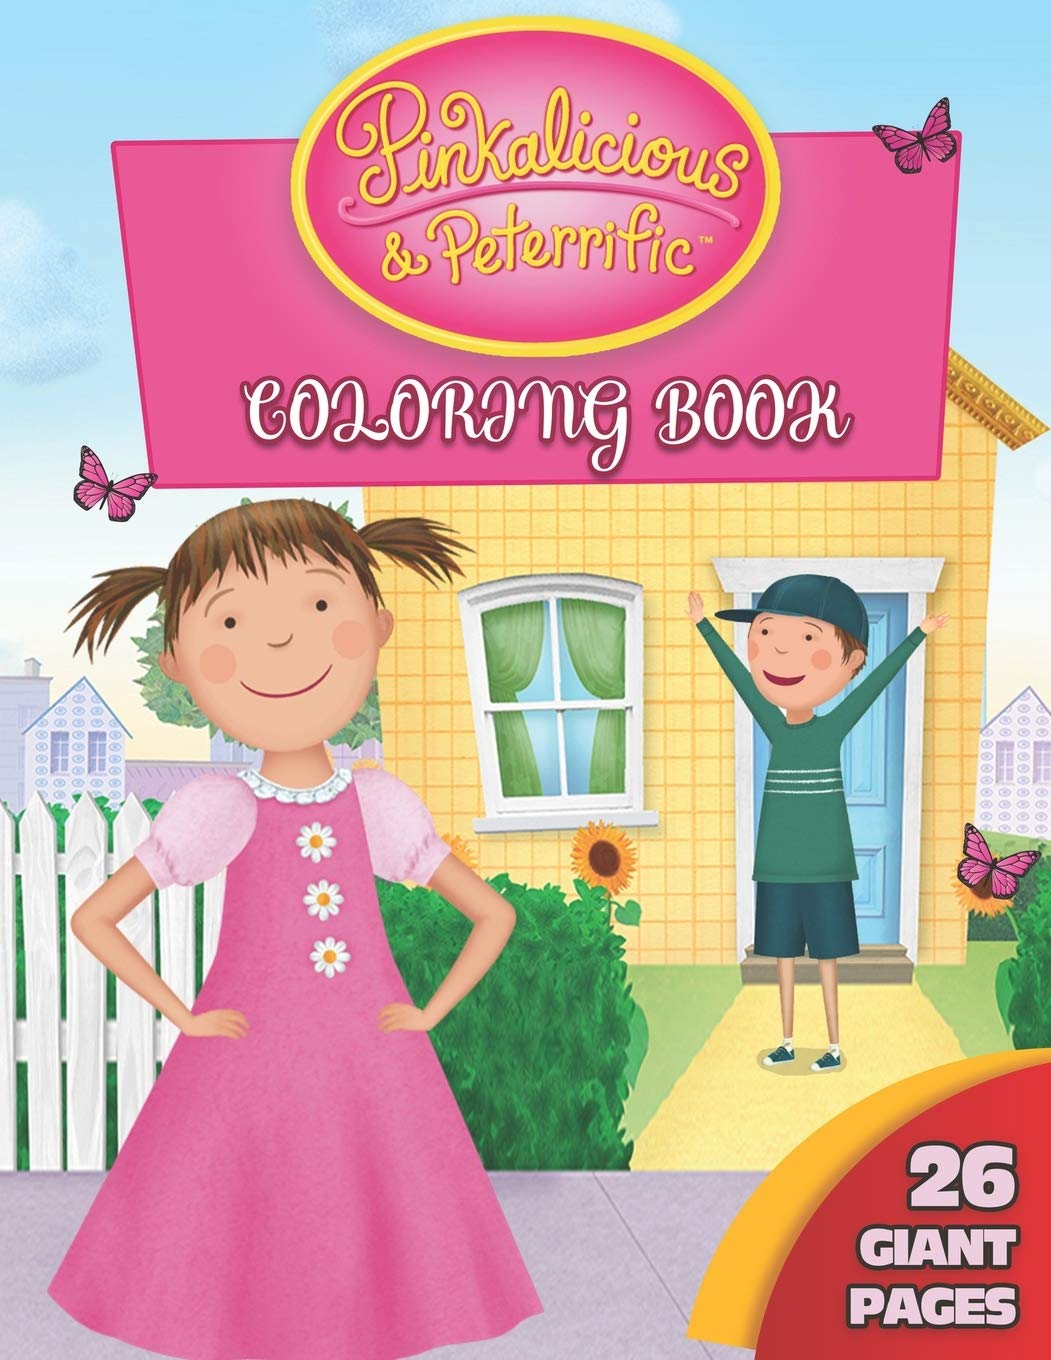 Pinkalicious and peterrific coloring book great gift for any kid ages from with giant pages and high quality images by moana burton